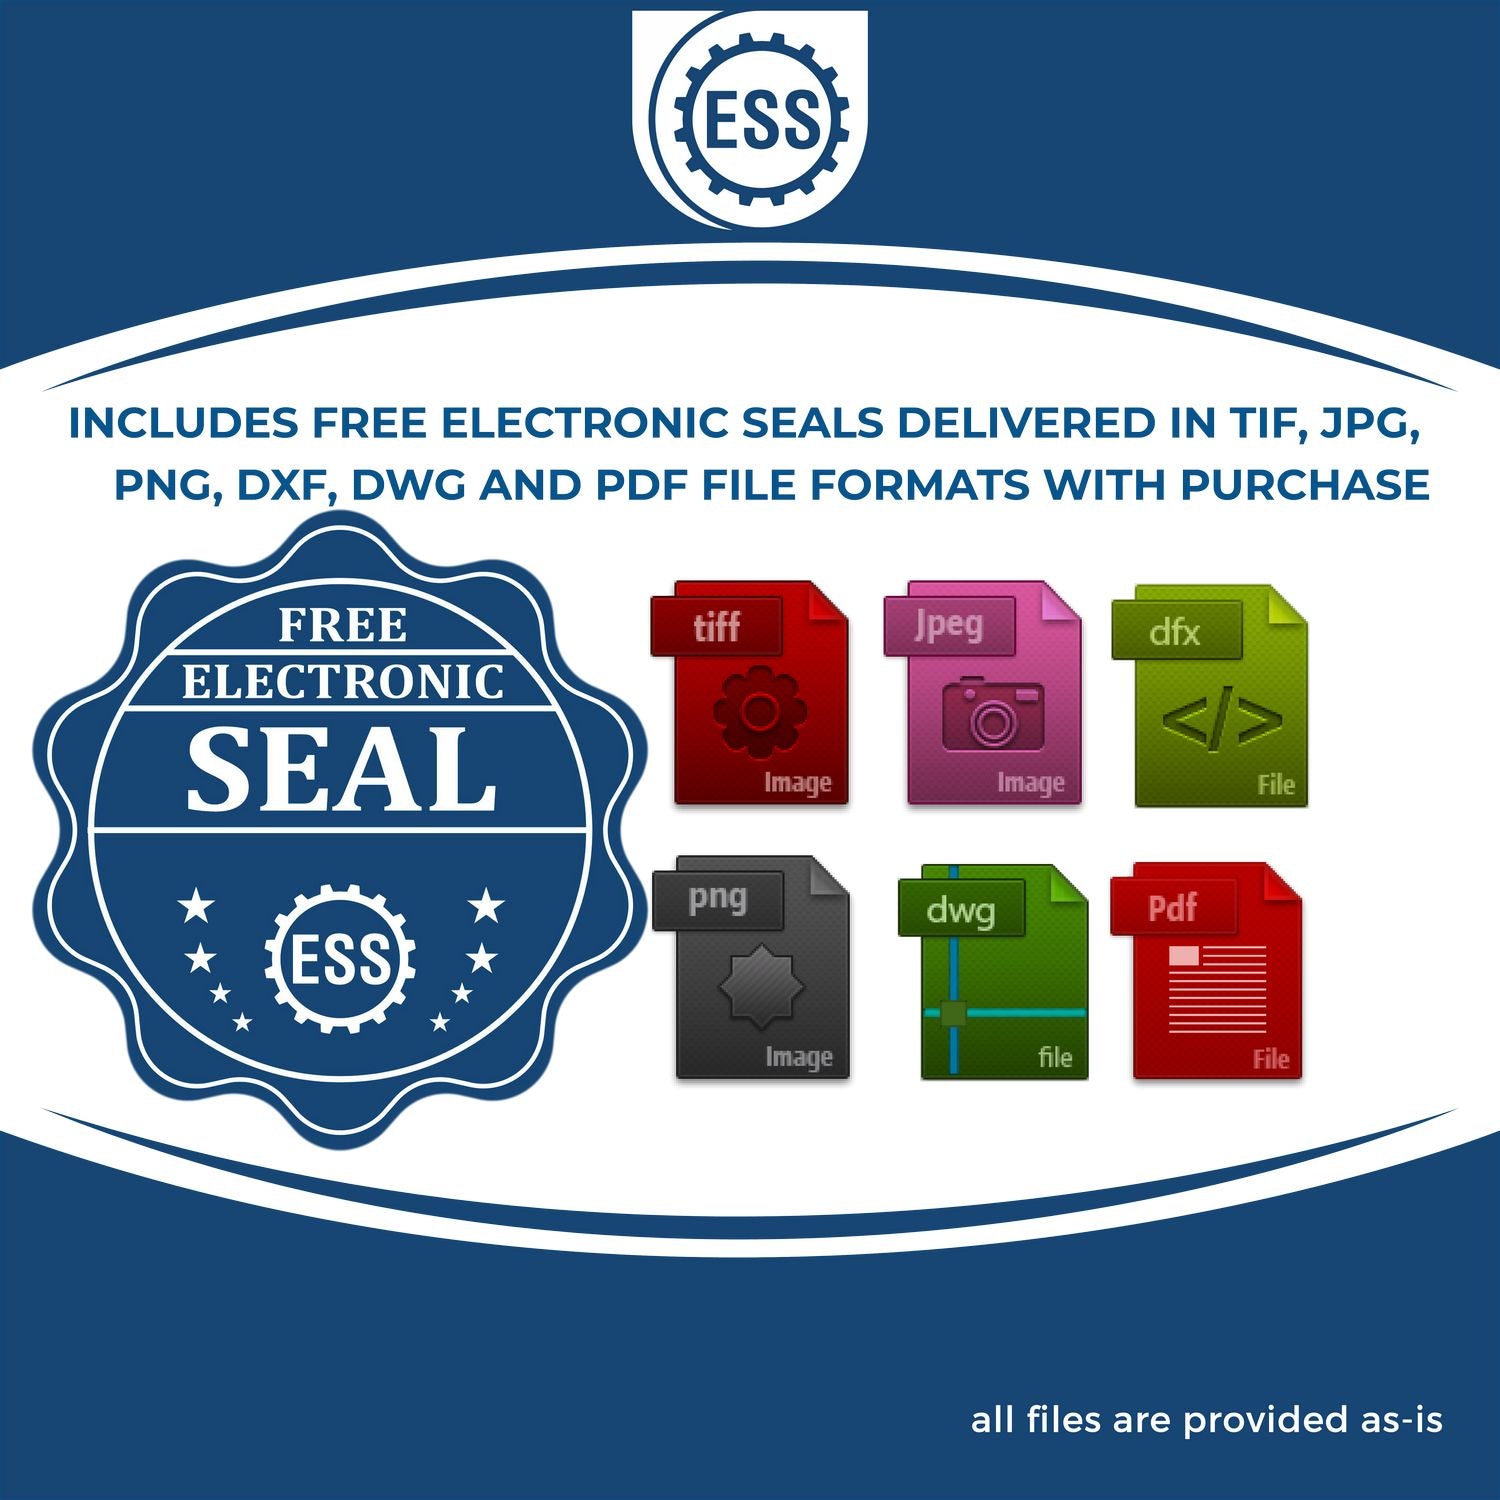 An infographic for the free electronic seal for the Hybrid Alabama Land Surveyor Seal illustrating the different file type icons such as DXF, DWG, TIF, JPG and PNG.